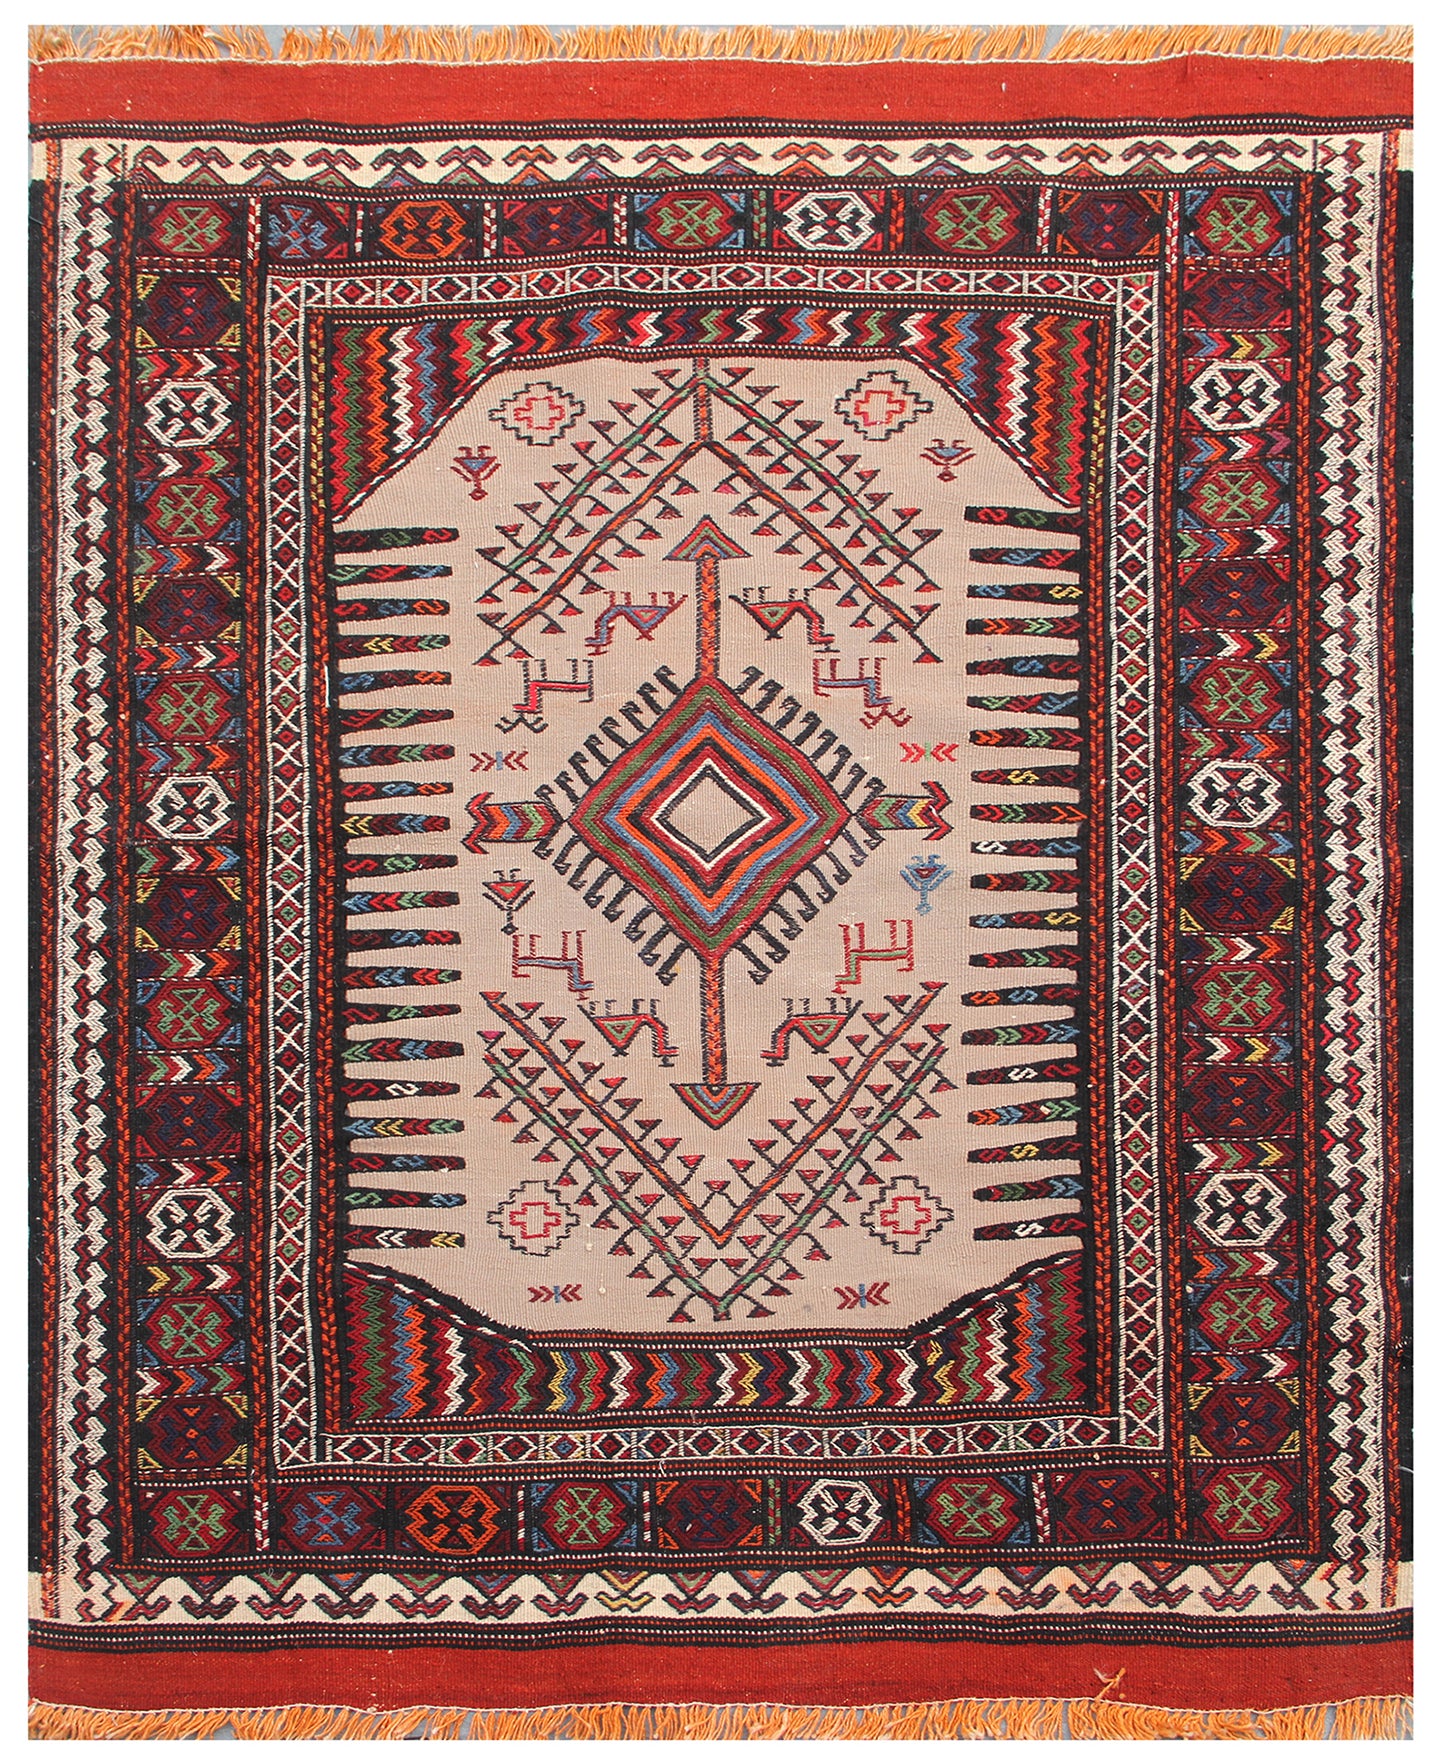 4'x4' Tribal Baluchi Sofreh Kilim with Camels